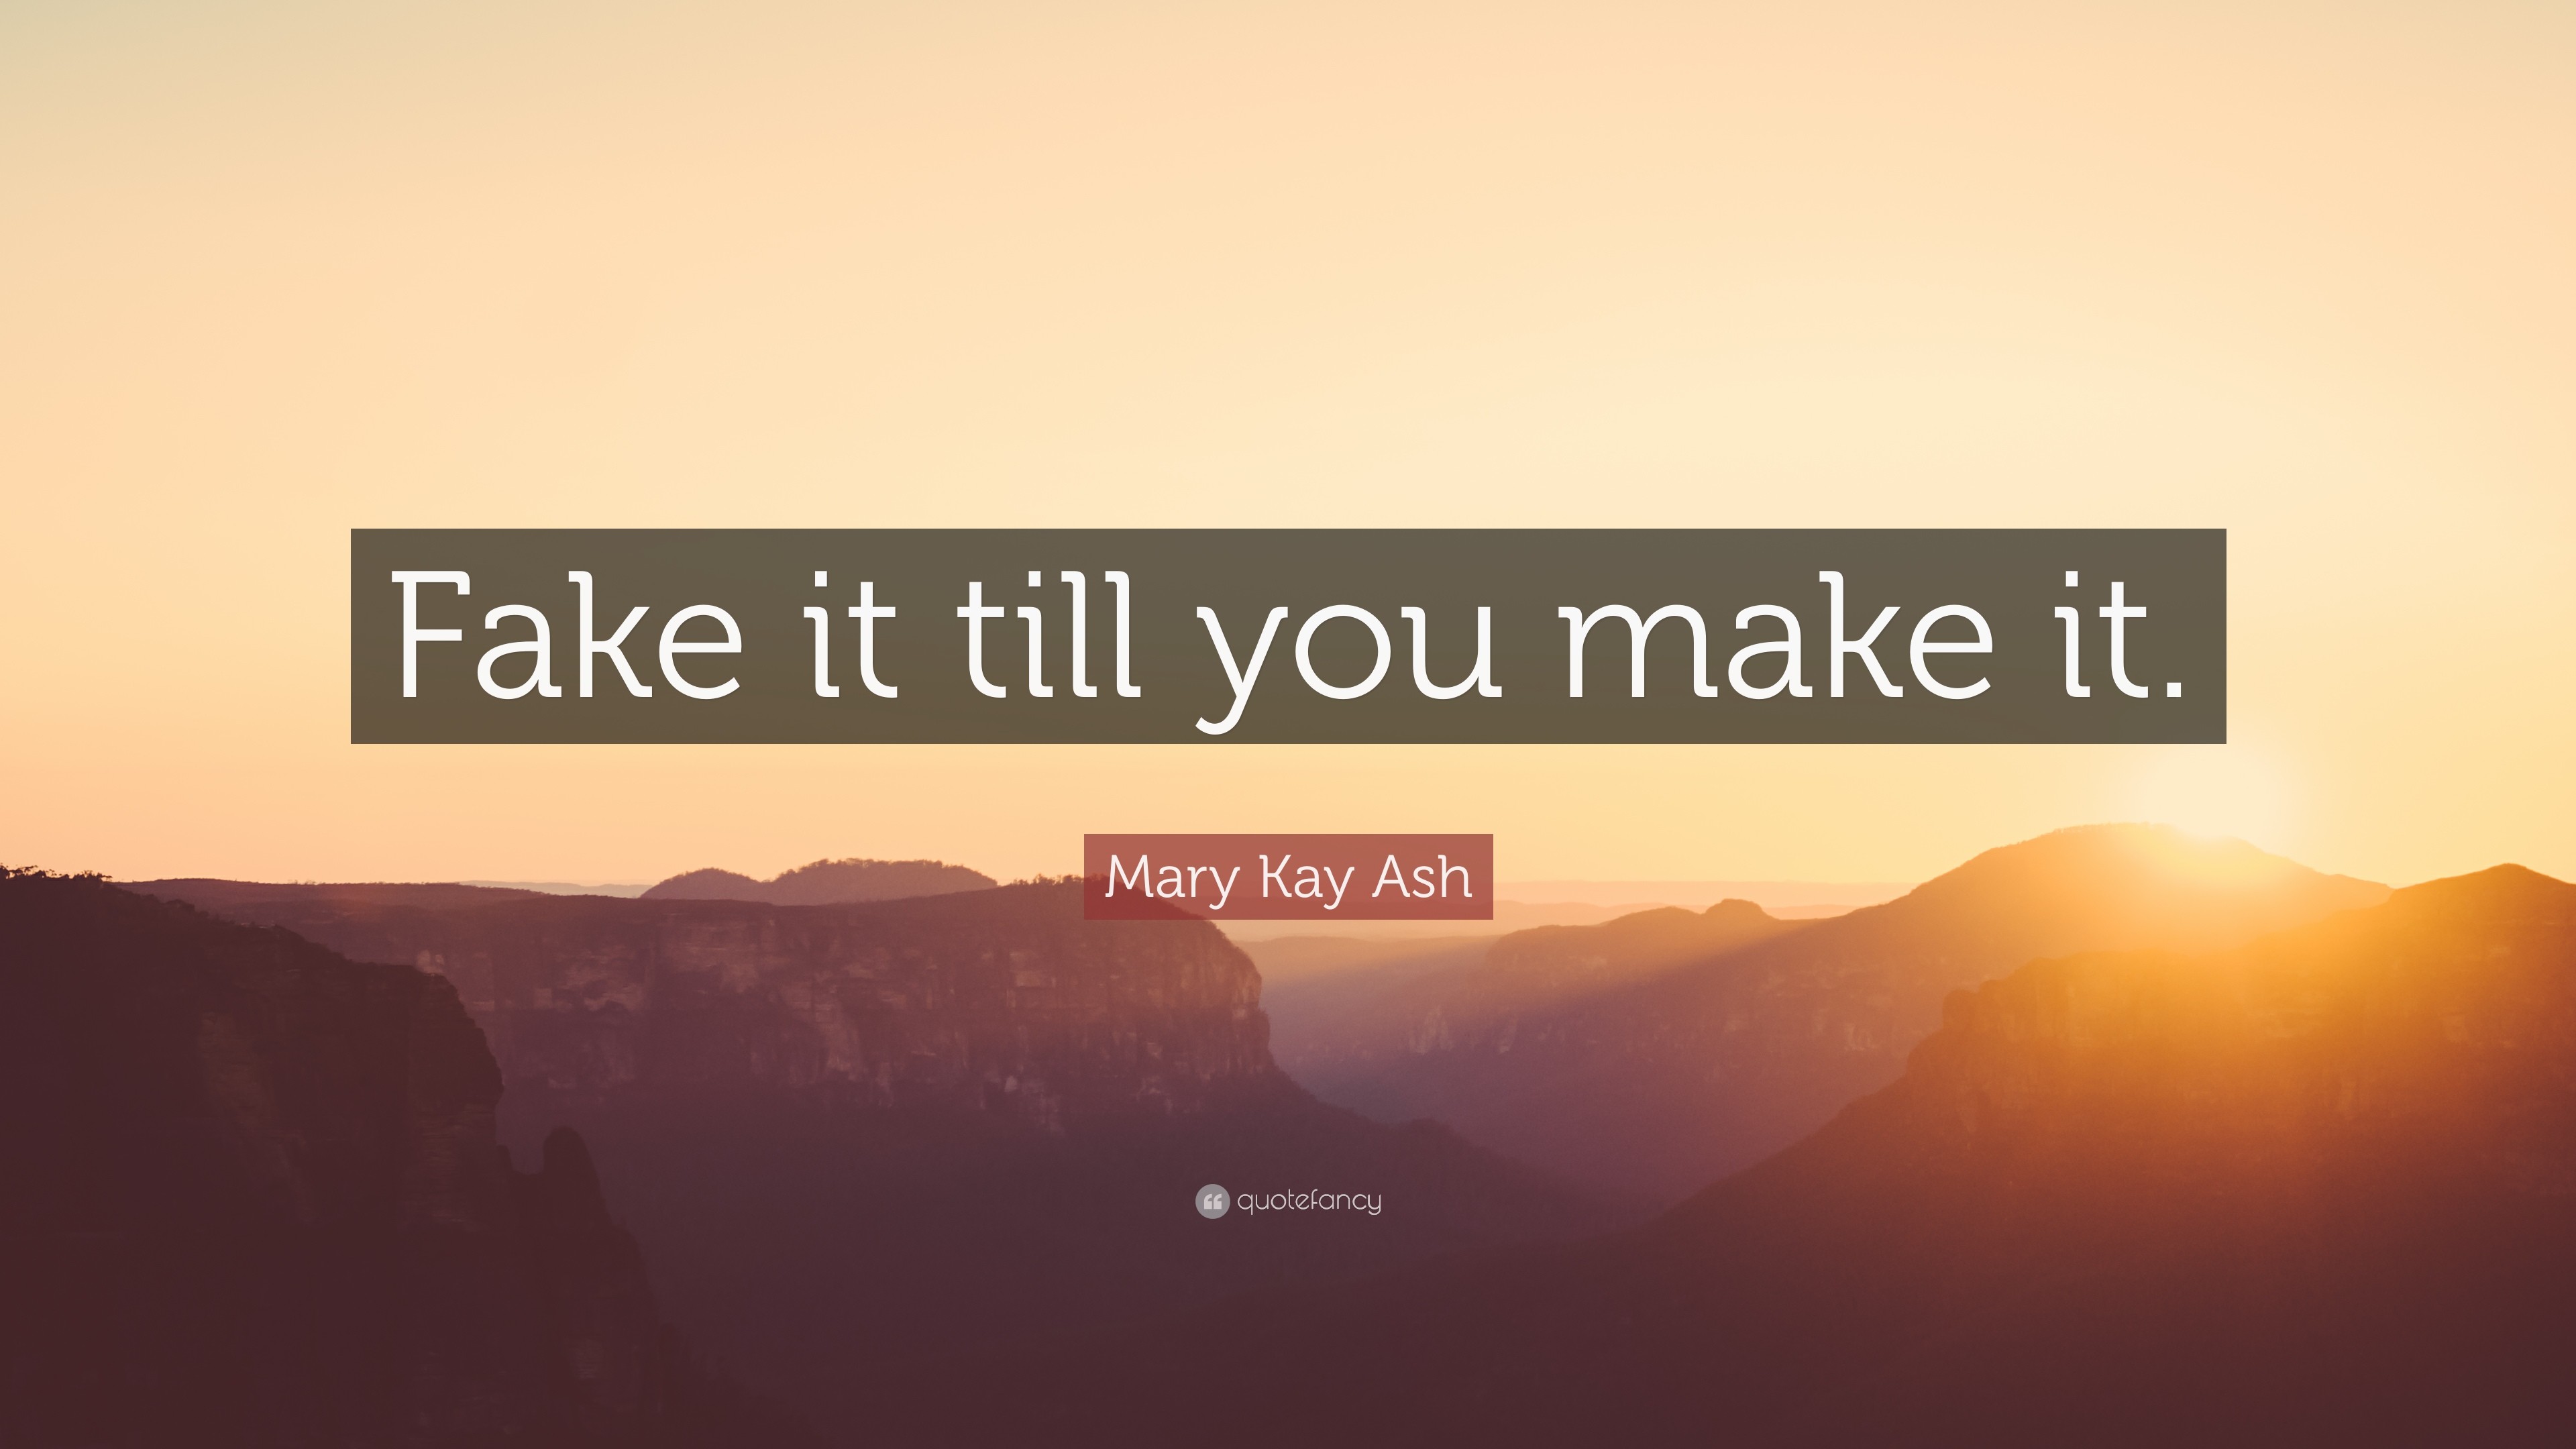 3840x2160 Mary Kay Ash Quote: “Fake it till you make it.”